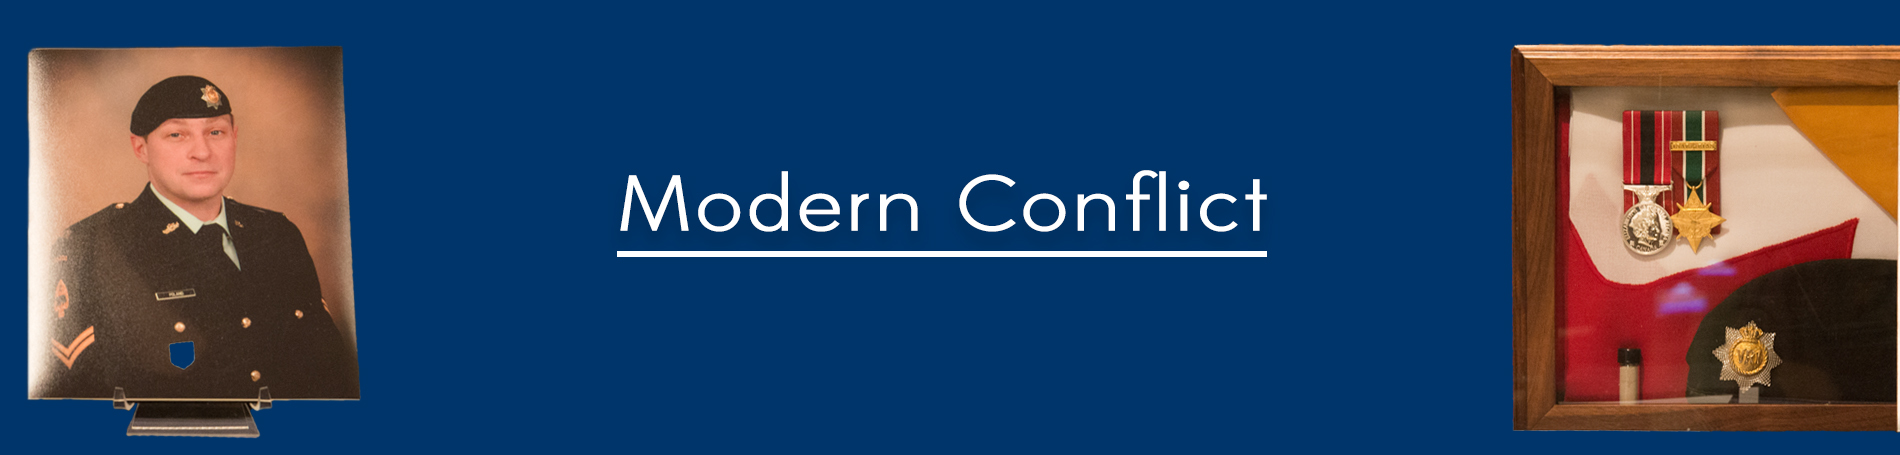 Blue background with text that reads, "Modern Conflict". On the left is a photo of Brent Poland and a shadow box. In the bottom right corner is the "Lambton at war" wordmark.